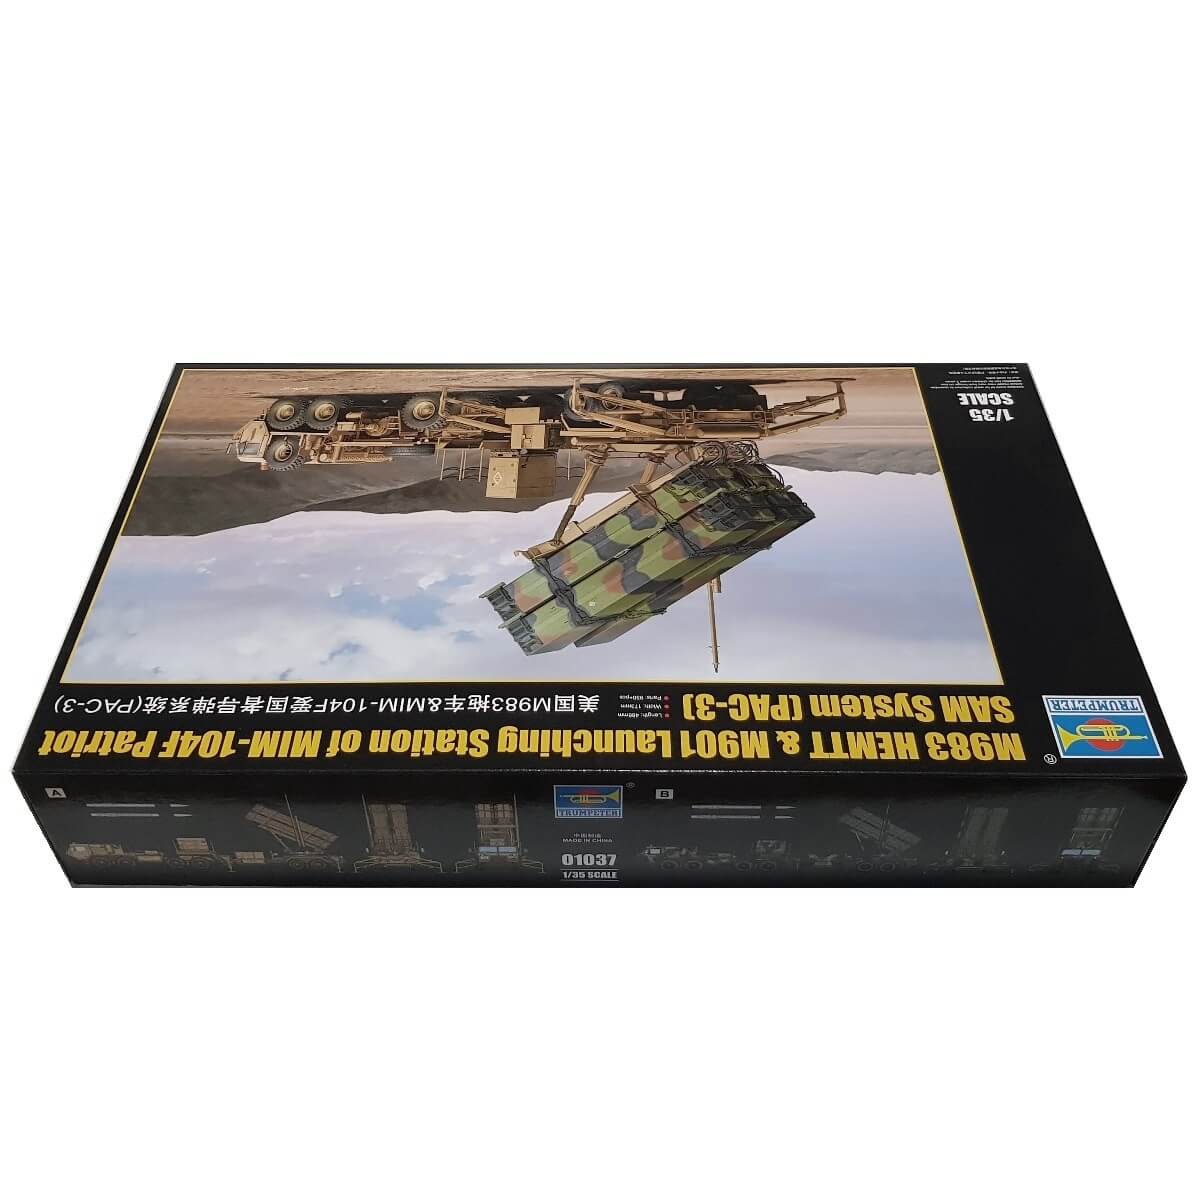 1:35 M983 HEMTT and M901 Launching Station of MIM-104F Patriot SAM System (PAC-3) - TRUMPETER